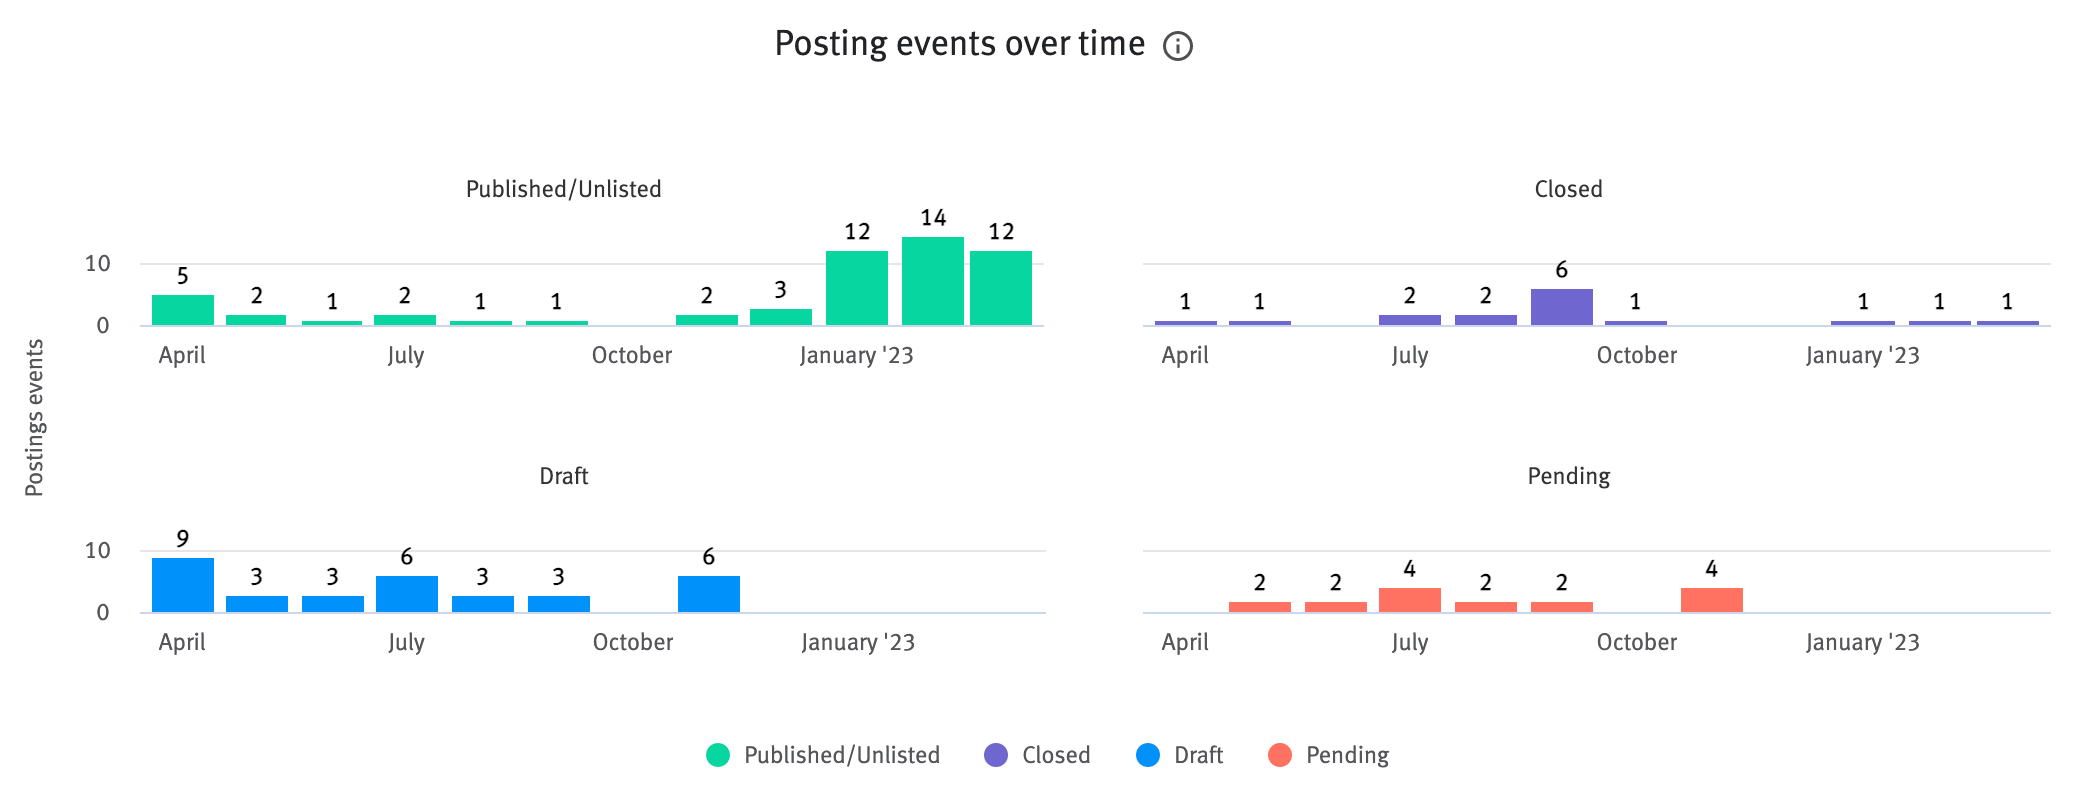 Posting events over time chart